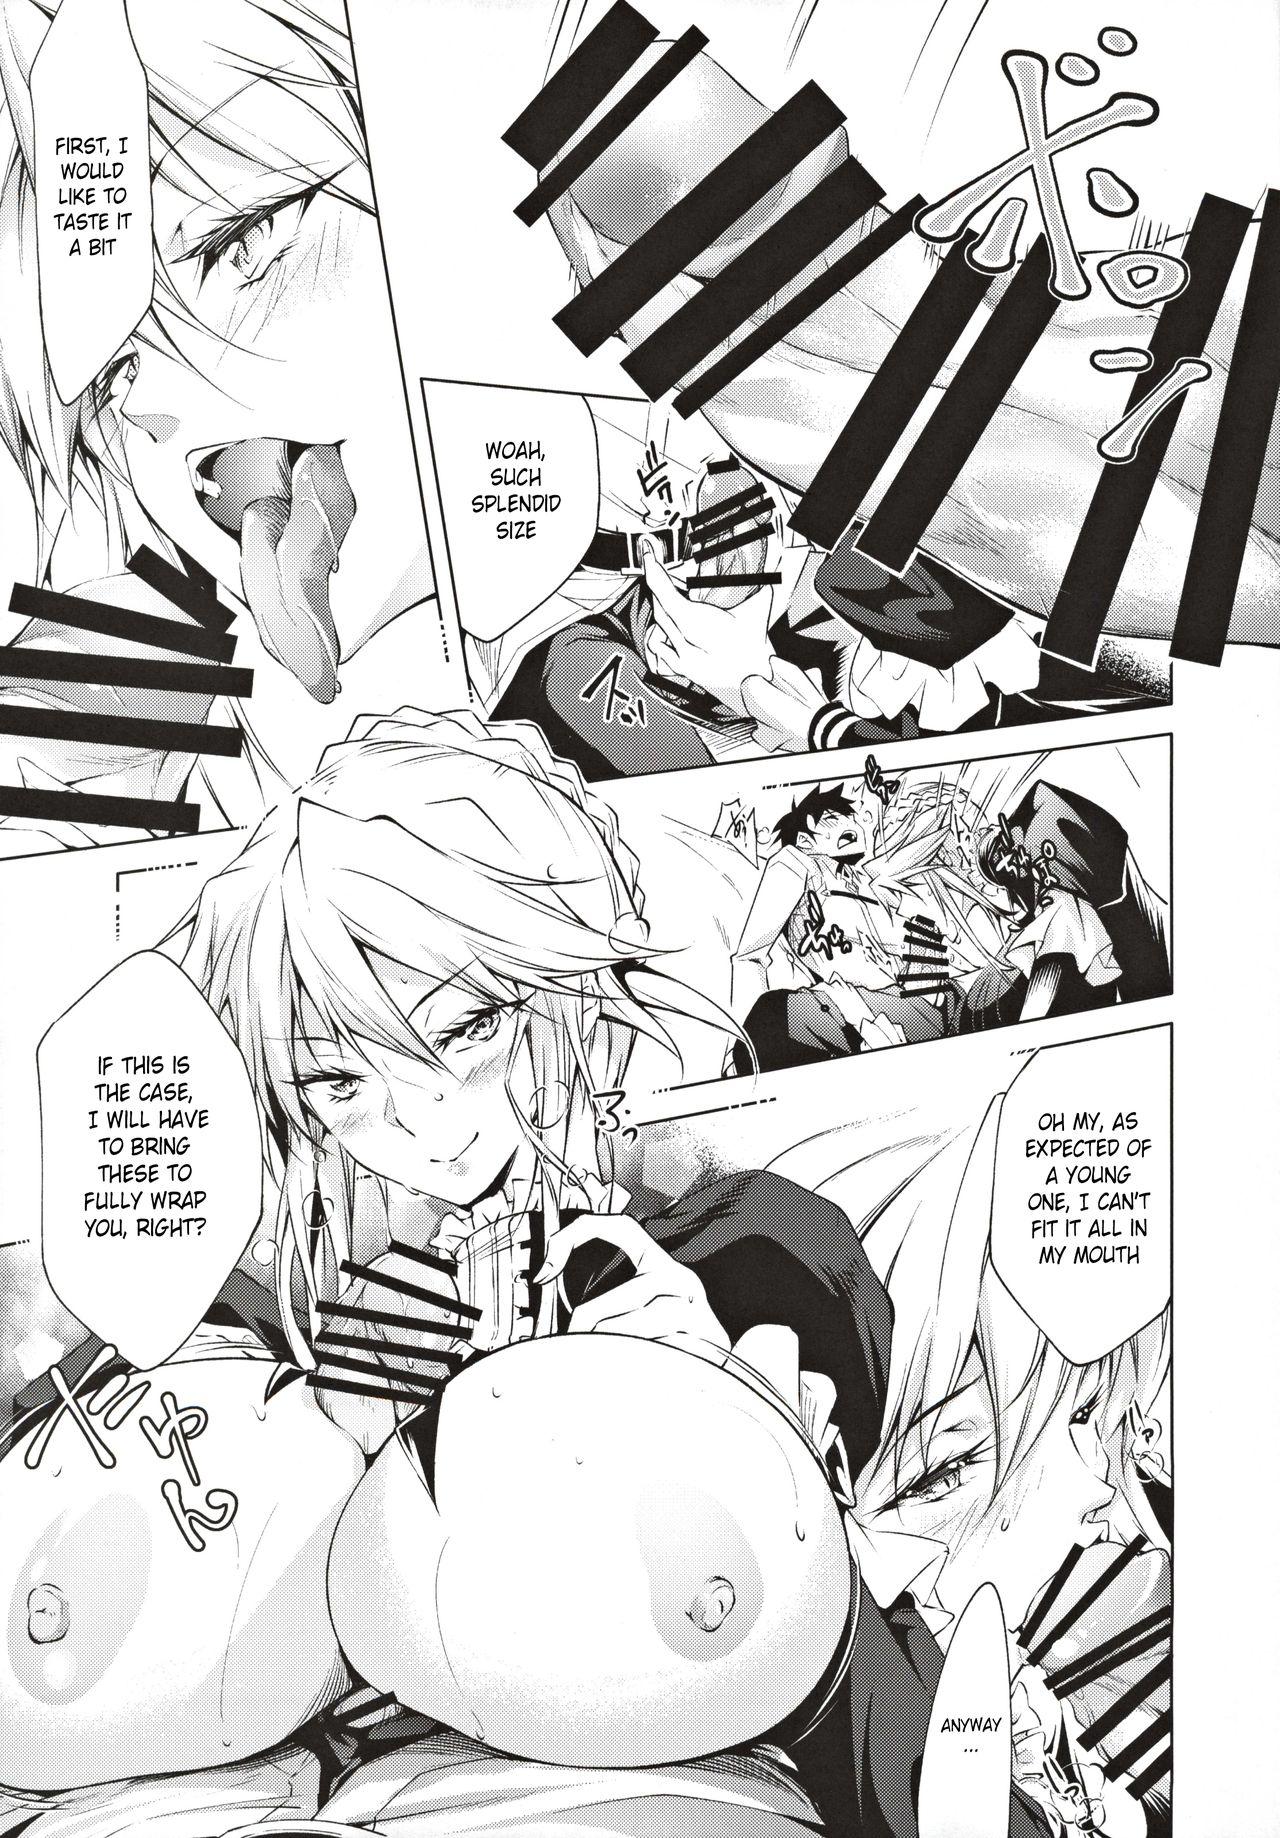 Pussy Orgasm Pendra Shimai no Seijijou | The Pendragon twin sisters' sexual situation - Fate grand order Exposed - Page 8